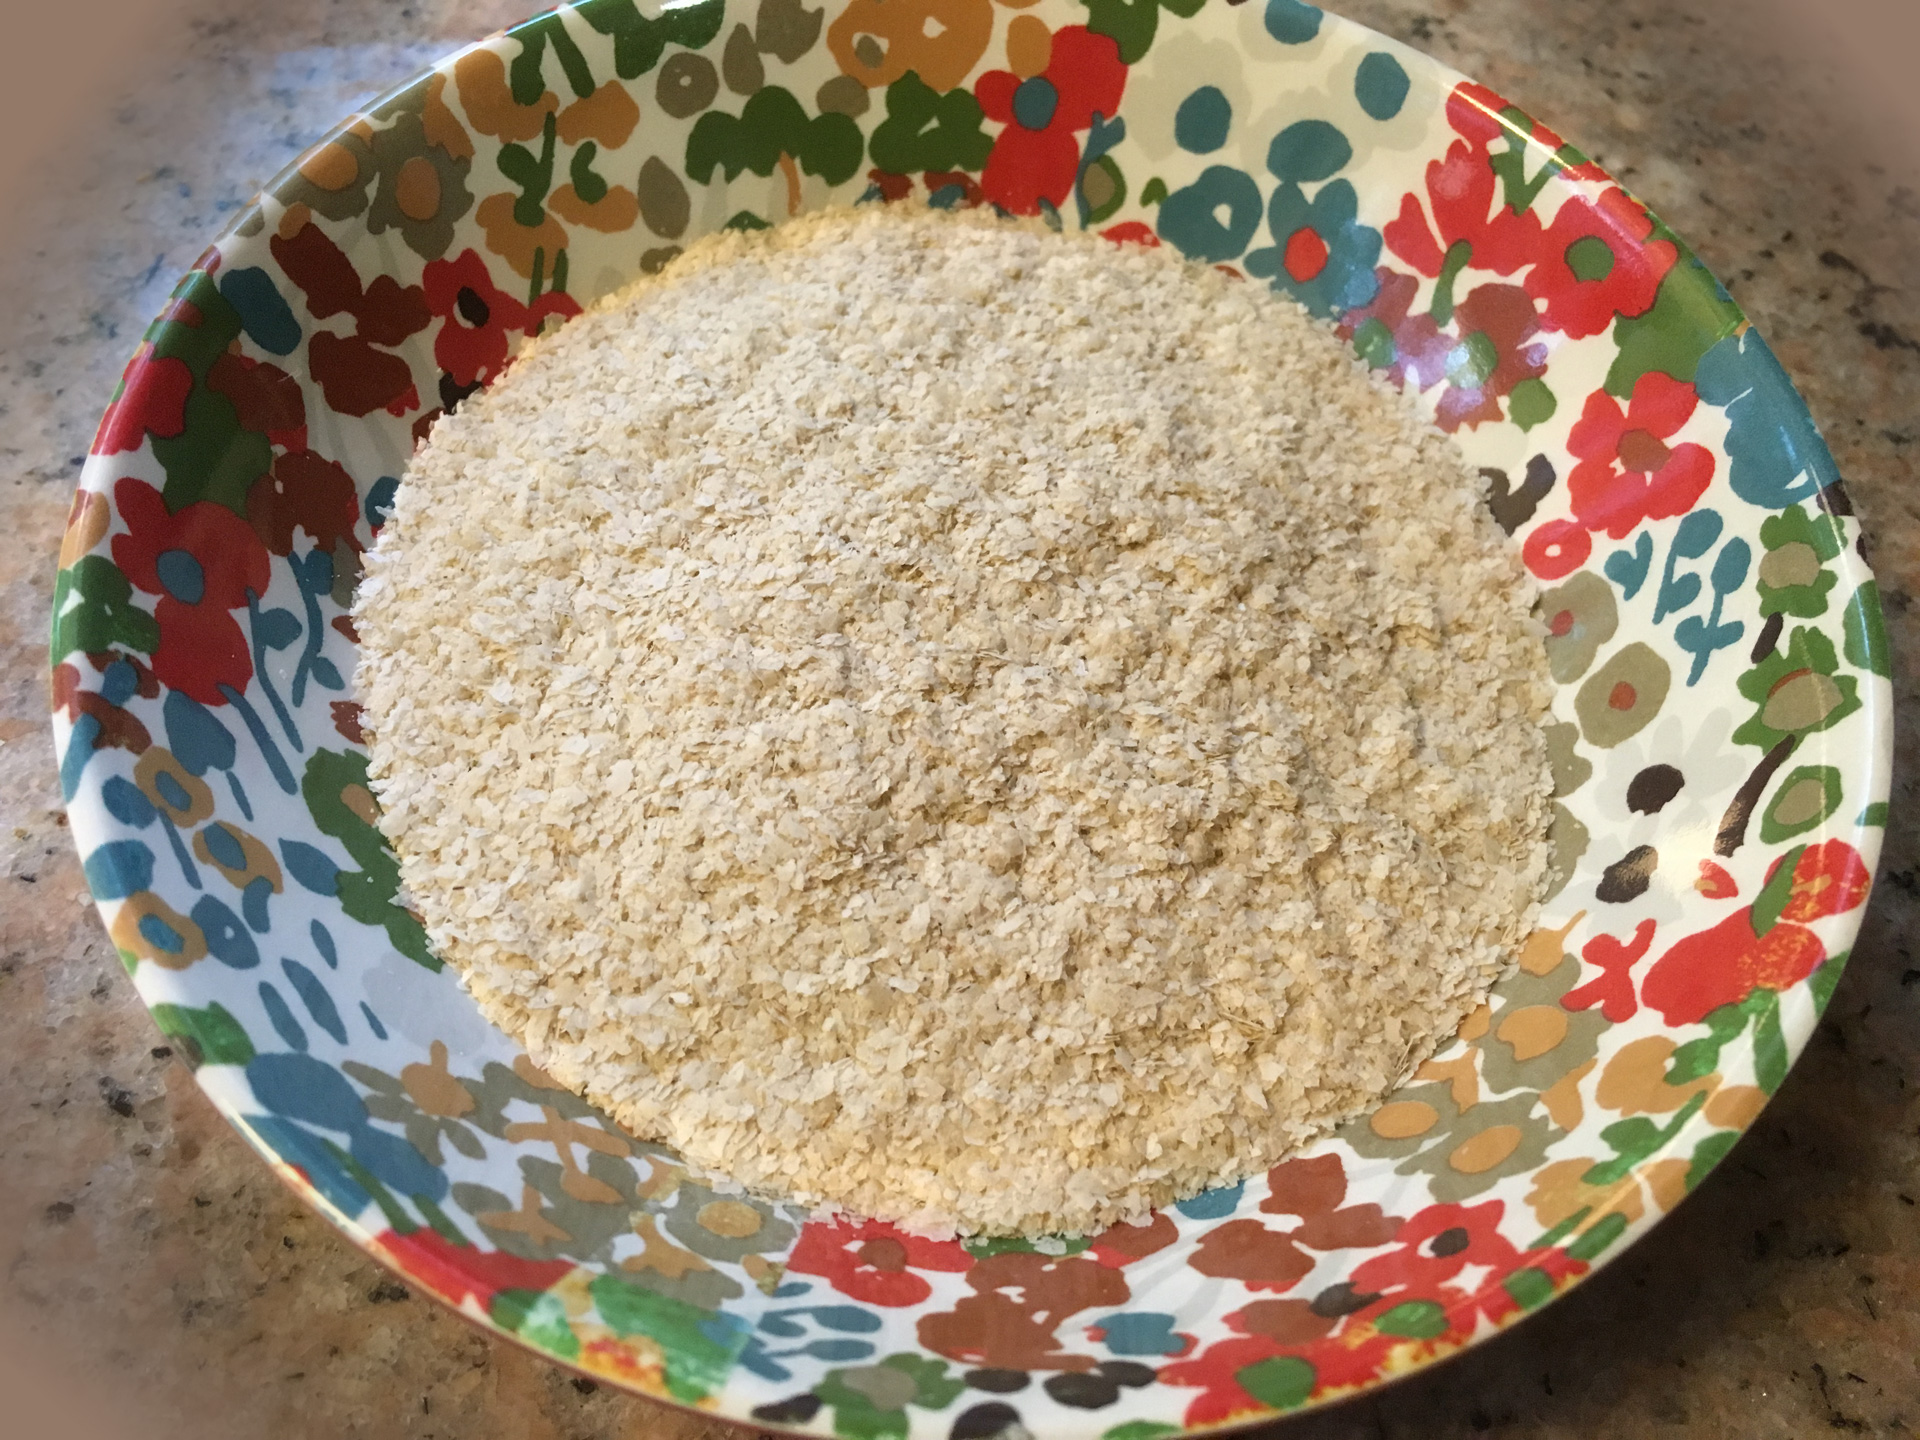 drum dried baby cereal sample - image